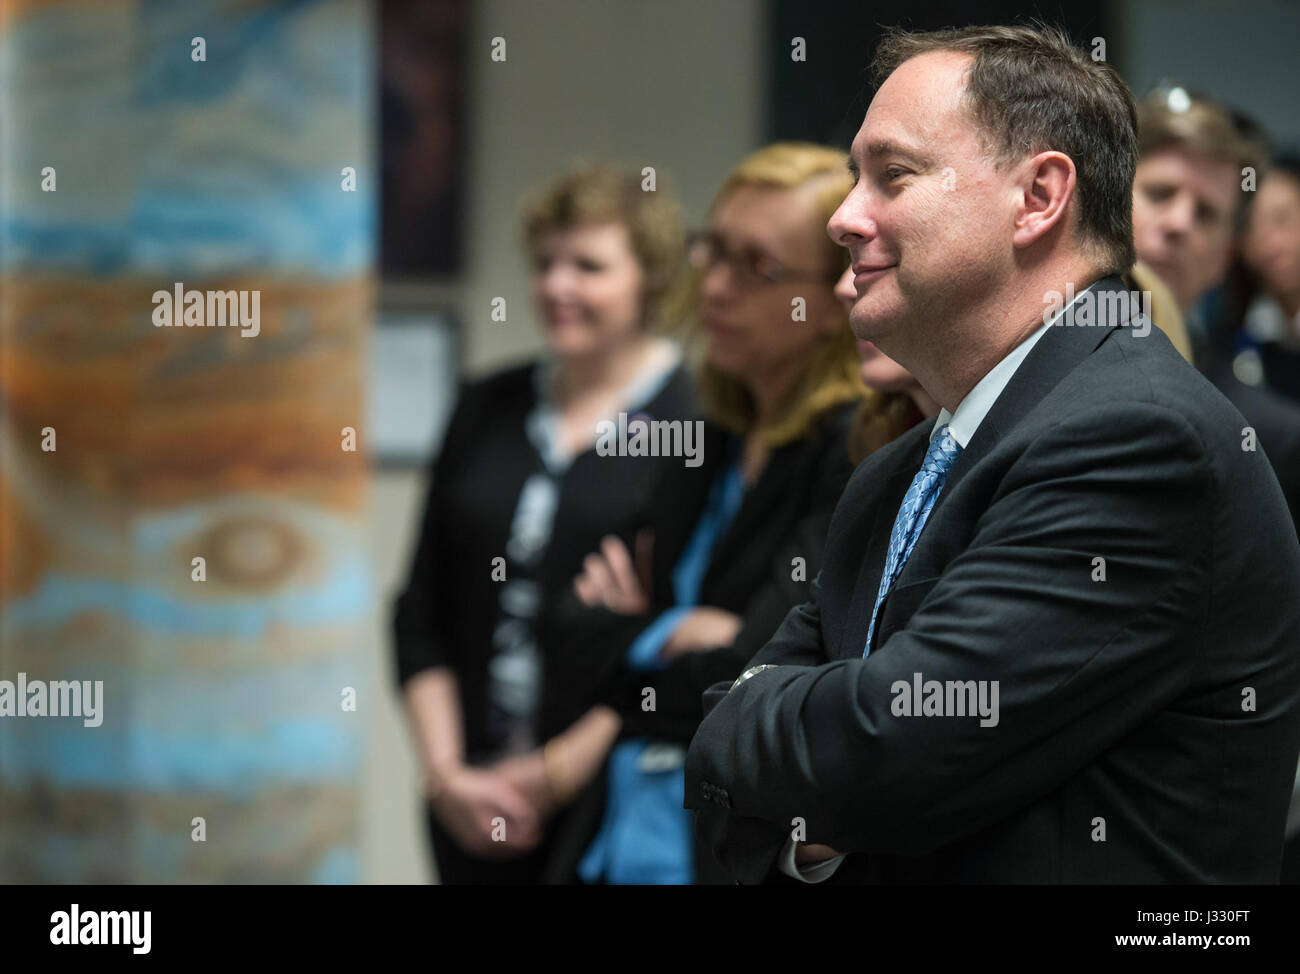 Acting NASA Administrator Robert Lightfoot during a visit to Lockheed Martin's Mission Support Area, Wednesday, April 5, 2017 at Lockheed Martin Space Systems in Littleton, Colo. The Mission Support Area supports six of NASA's robotic planetary spacecraft: Mars Odyssey, Mars Reconnaissance Orbiter, MAVEN, Juno, OSIRIS-REx, and the Spitzer Space Telescope.  Working with the NASA centers and mission science teams, the engineers develop and send commands and monitor the health of each spacecraft. Stock Photo